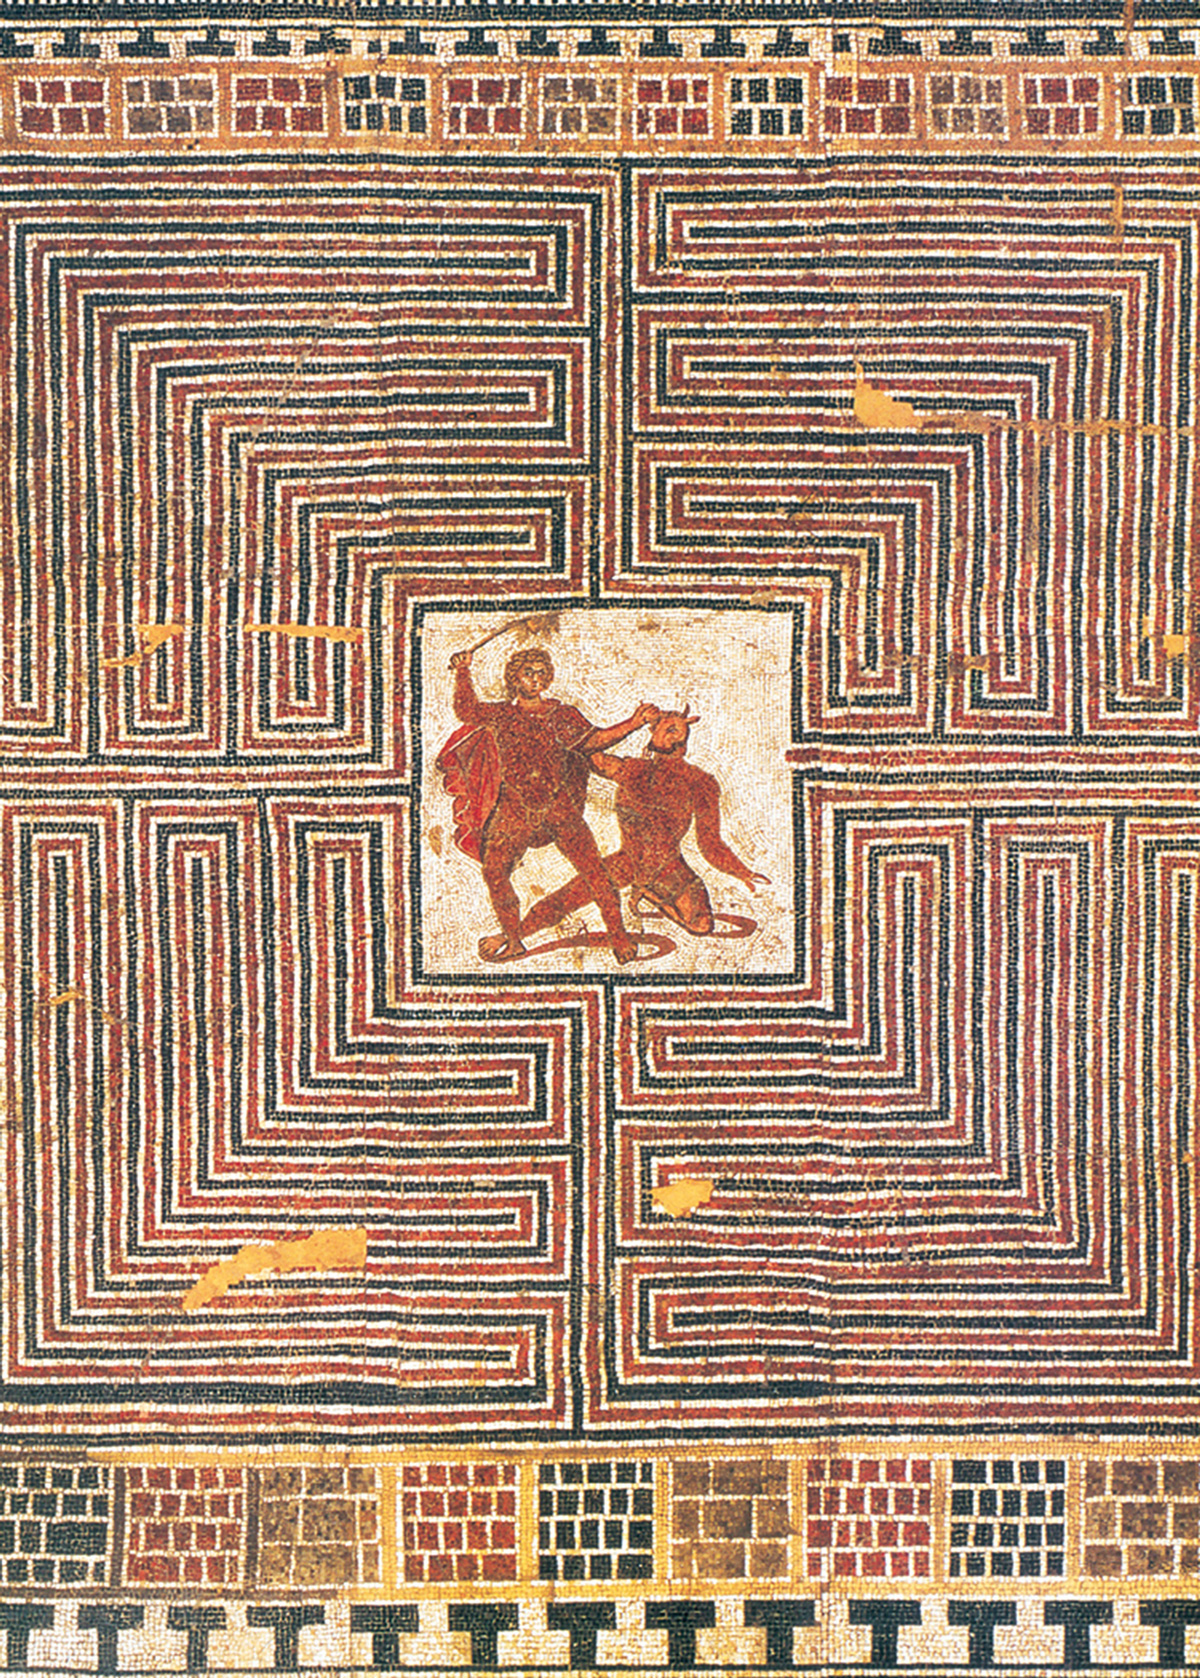 A Roman mosaic depicting the battle between Theseus and the Minotaur in the labyrinth, circa 275 to 300 CE.